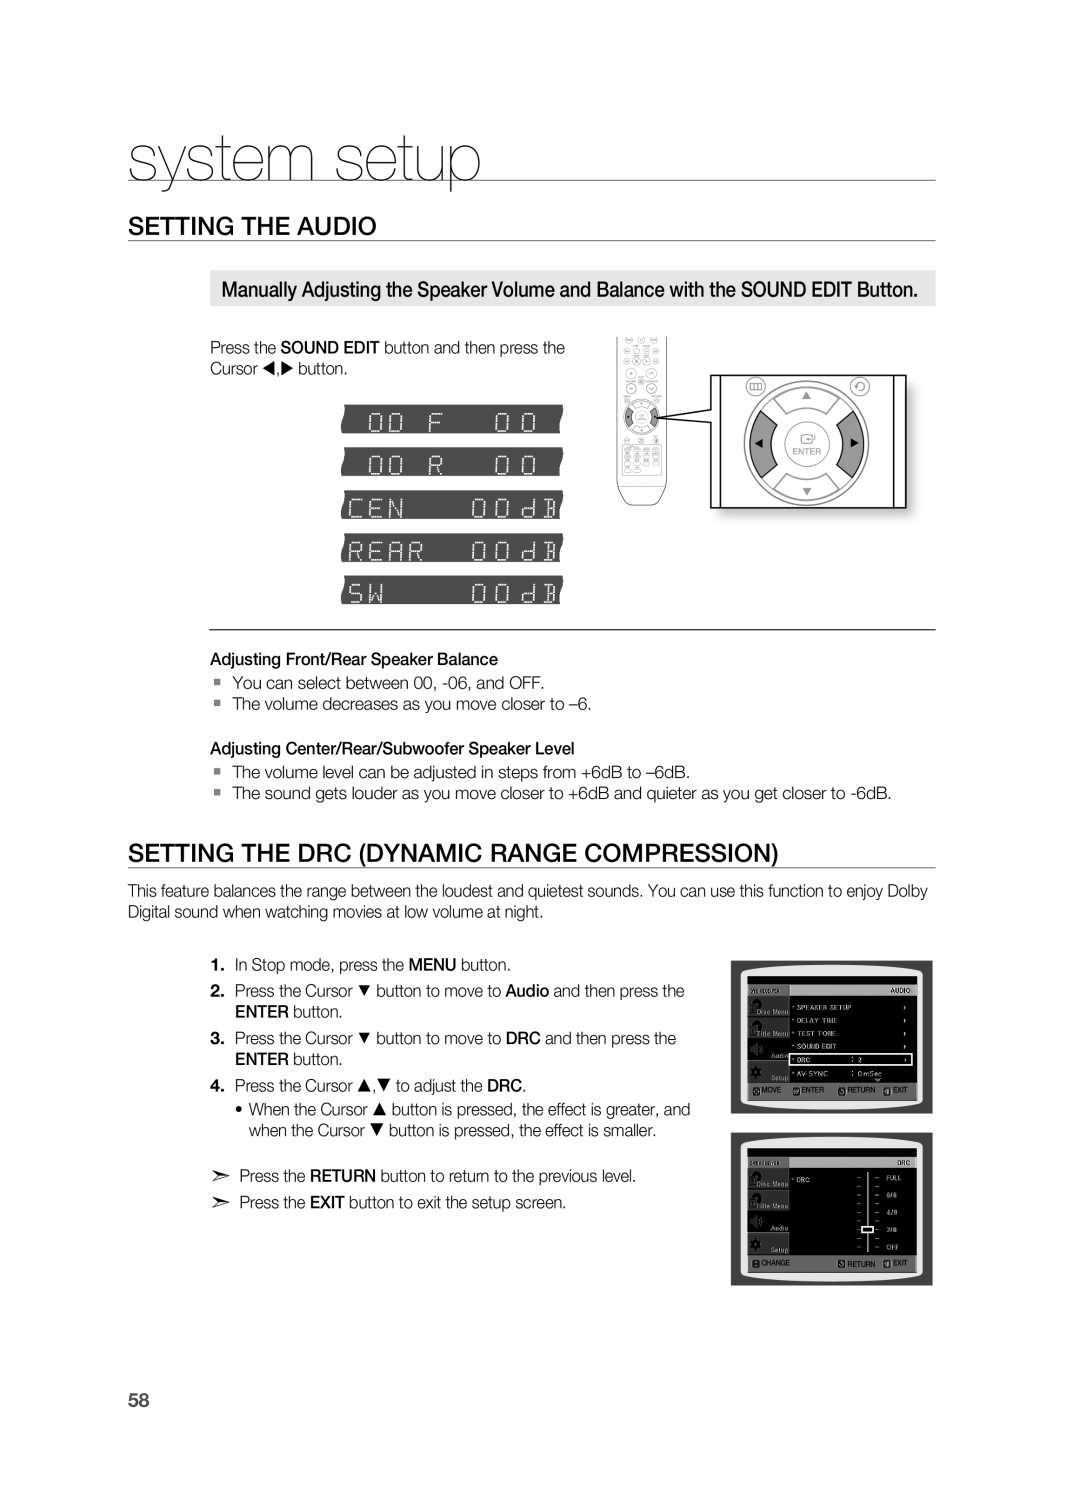 Samsung HT-TWZ415 user manual SETTINg THE AUDIO, SETTINg THE DrC DYNAMIC rANgE COMPrESSION, system setup 